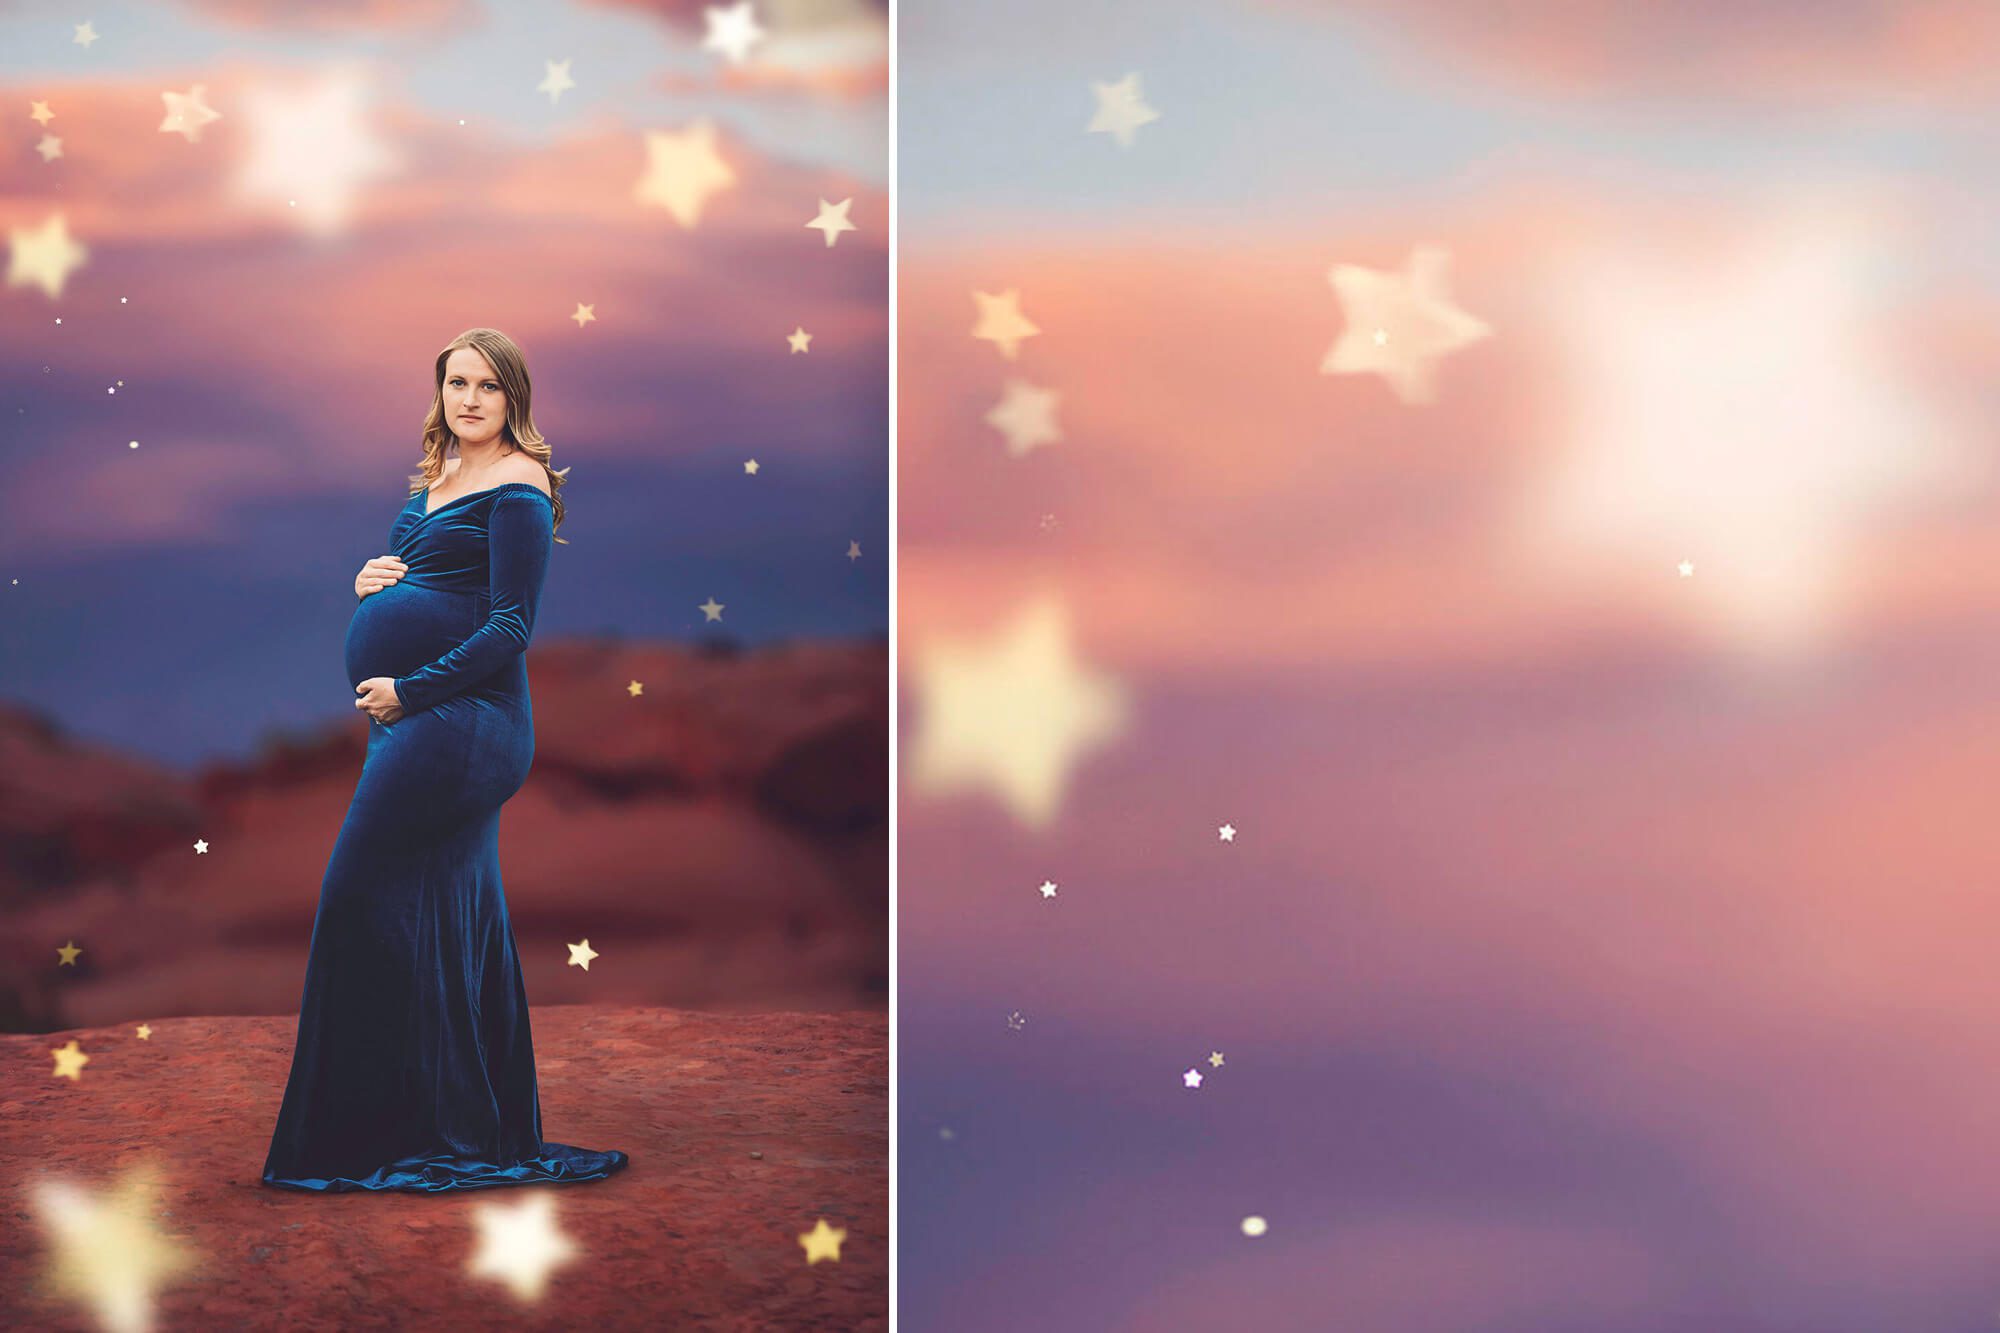 A Tucson maternity session my client was starry-eyed over